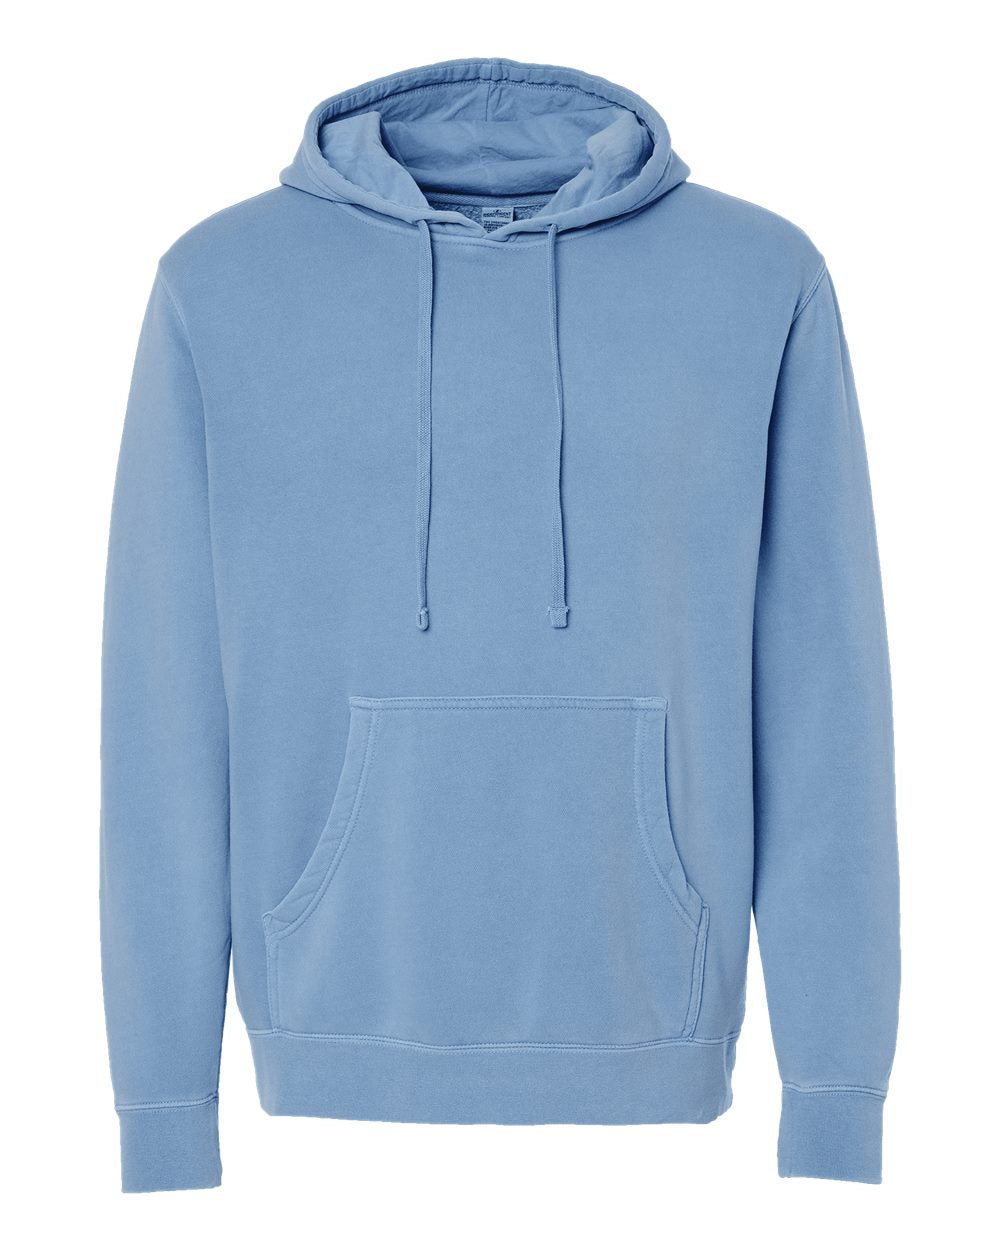 Independent Pigment-Dyed Hoodie (PRM4500) in Pigment Light Blue